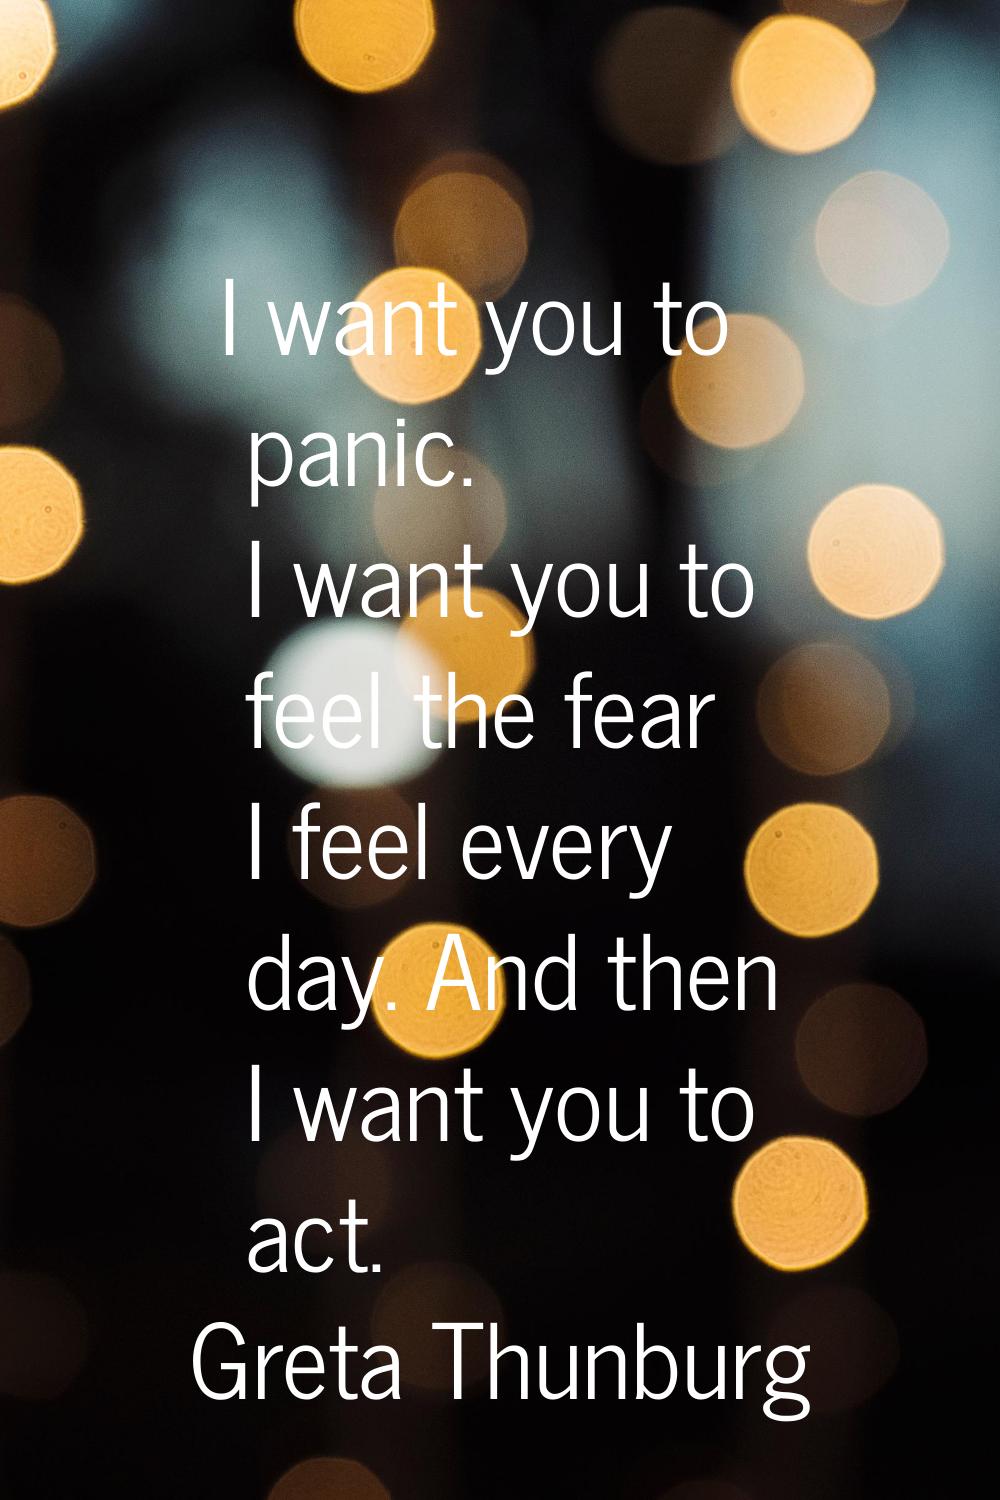 I want you to panic. I want you to feel the fear I feel every day. And then I want you to act.